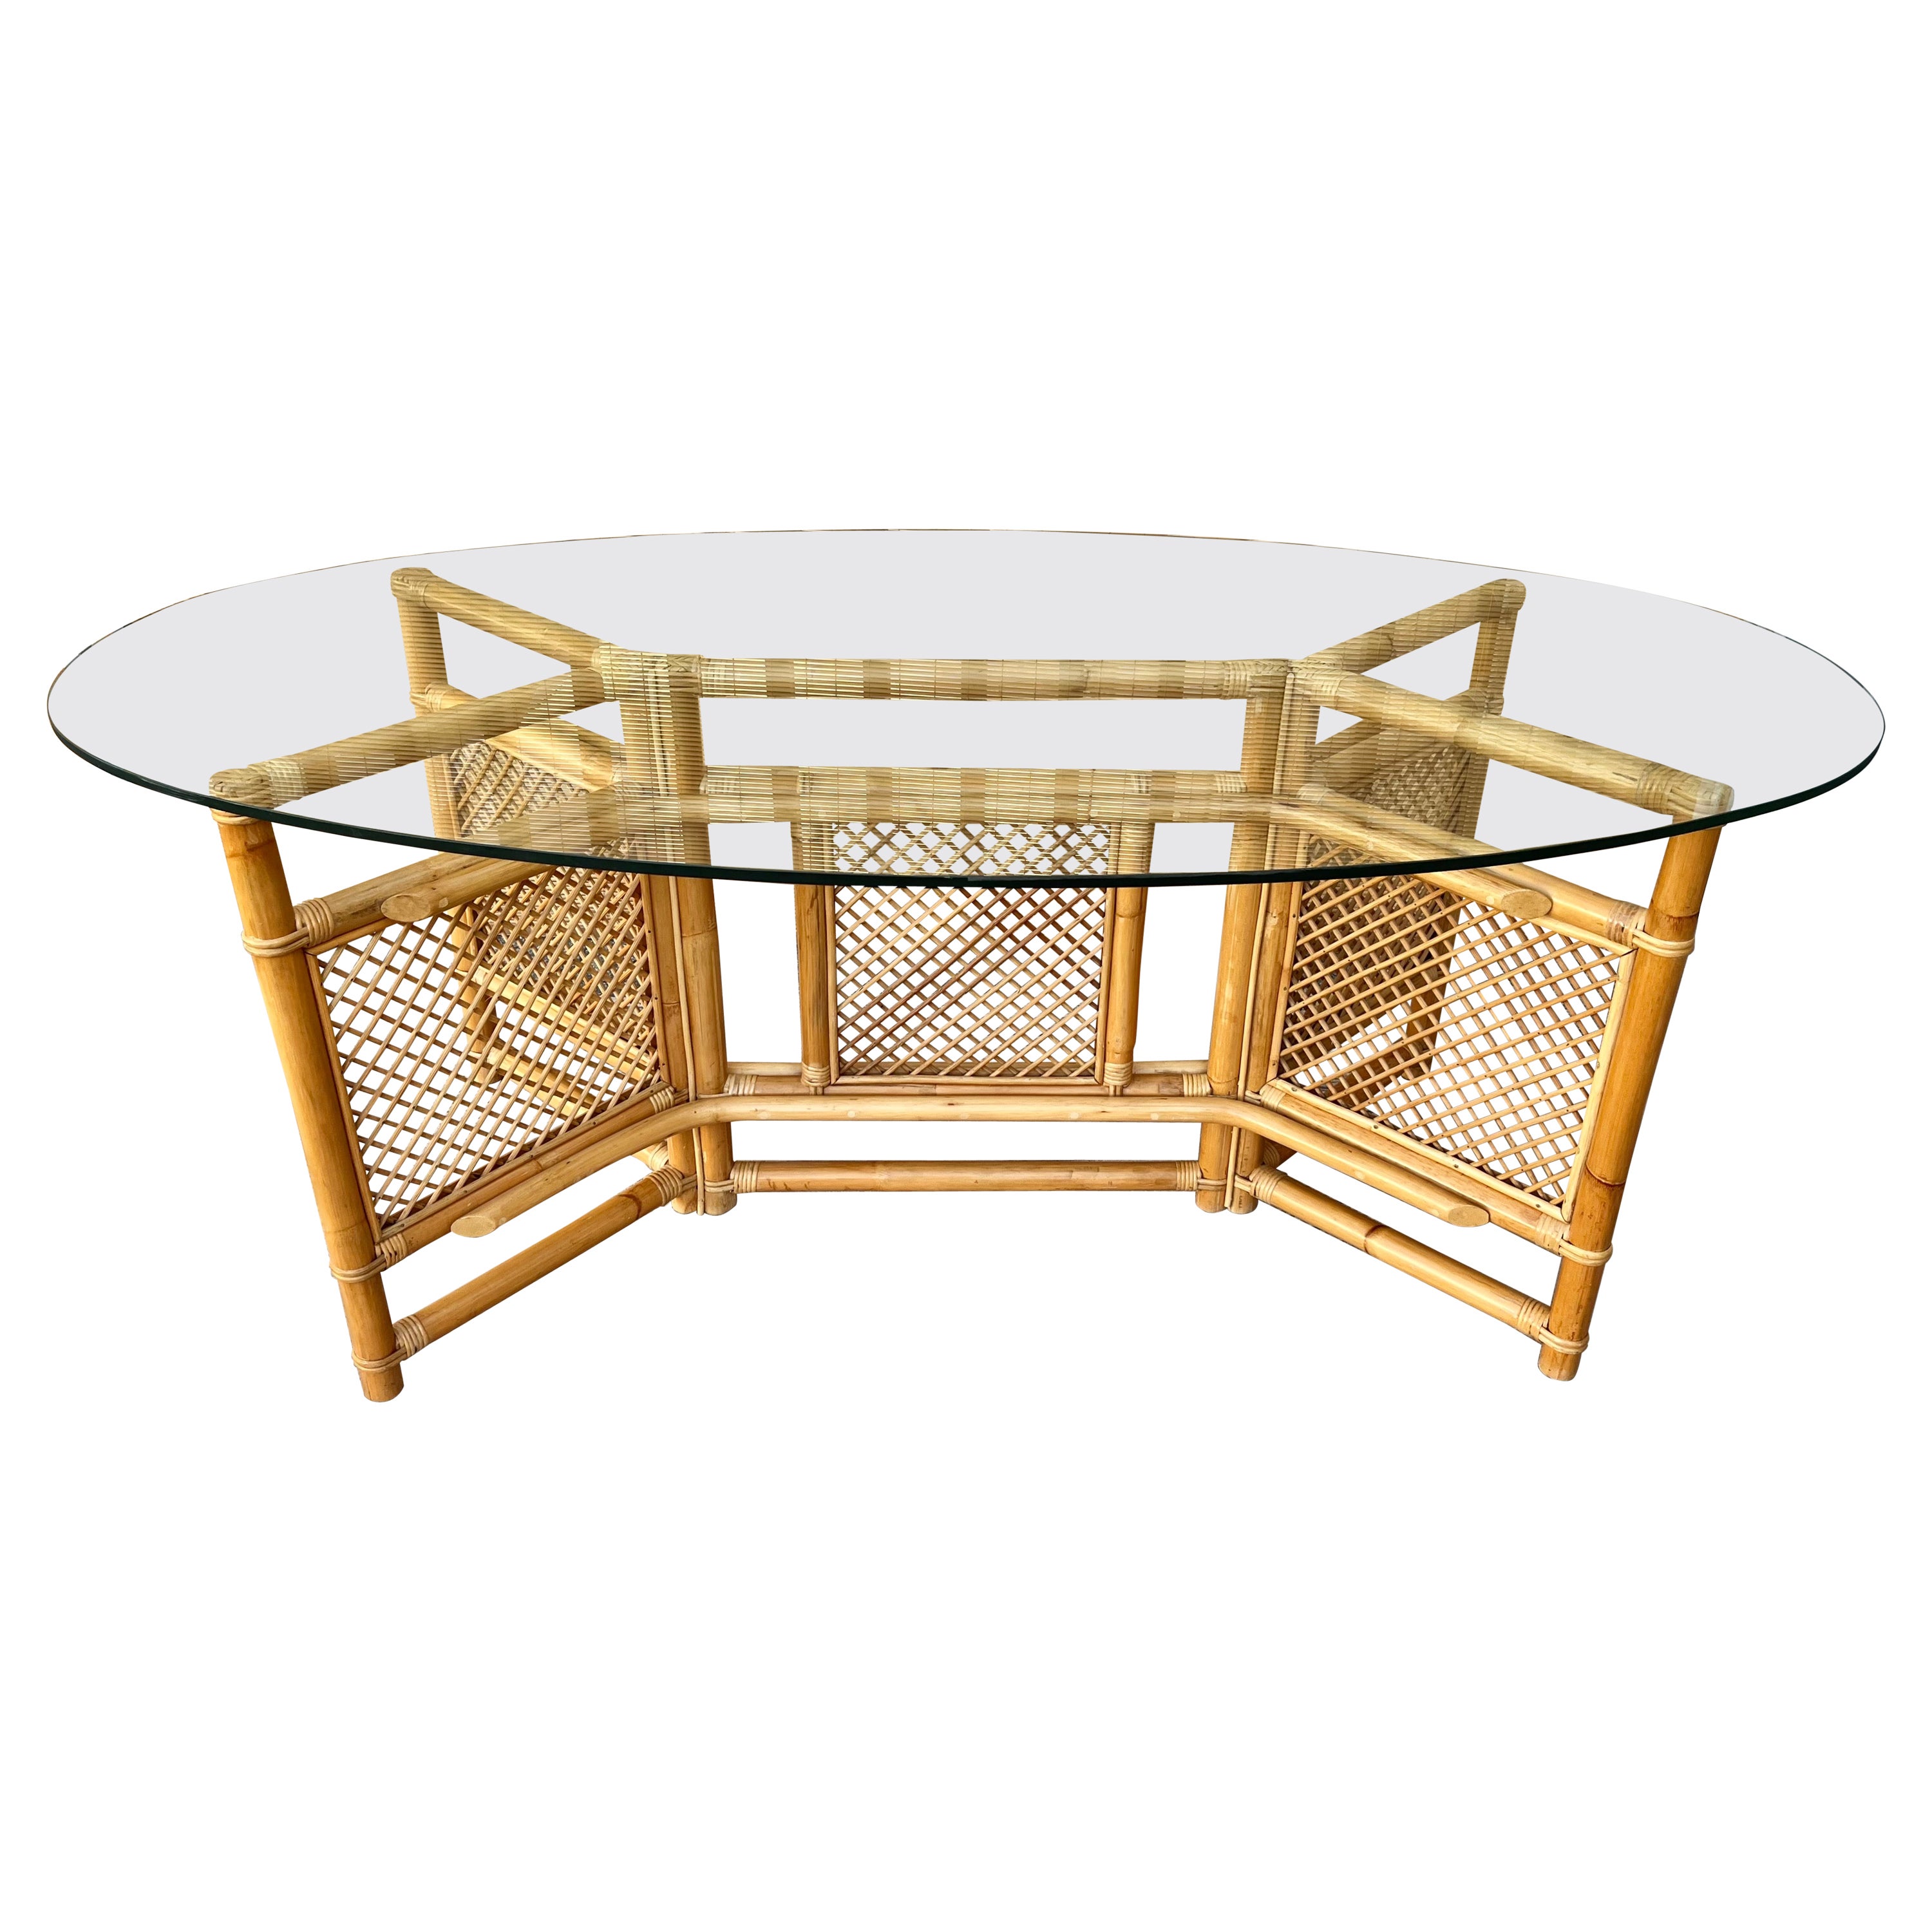 1980s Coastal Style Glass Top Rattan Dining Table in the Ficks Reed's Manner For Sale